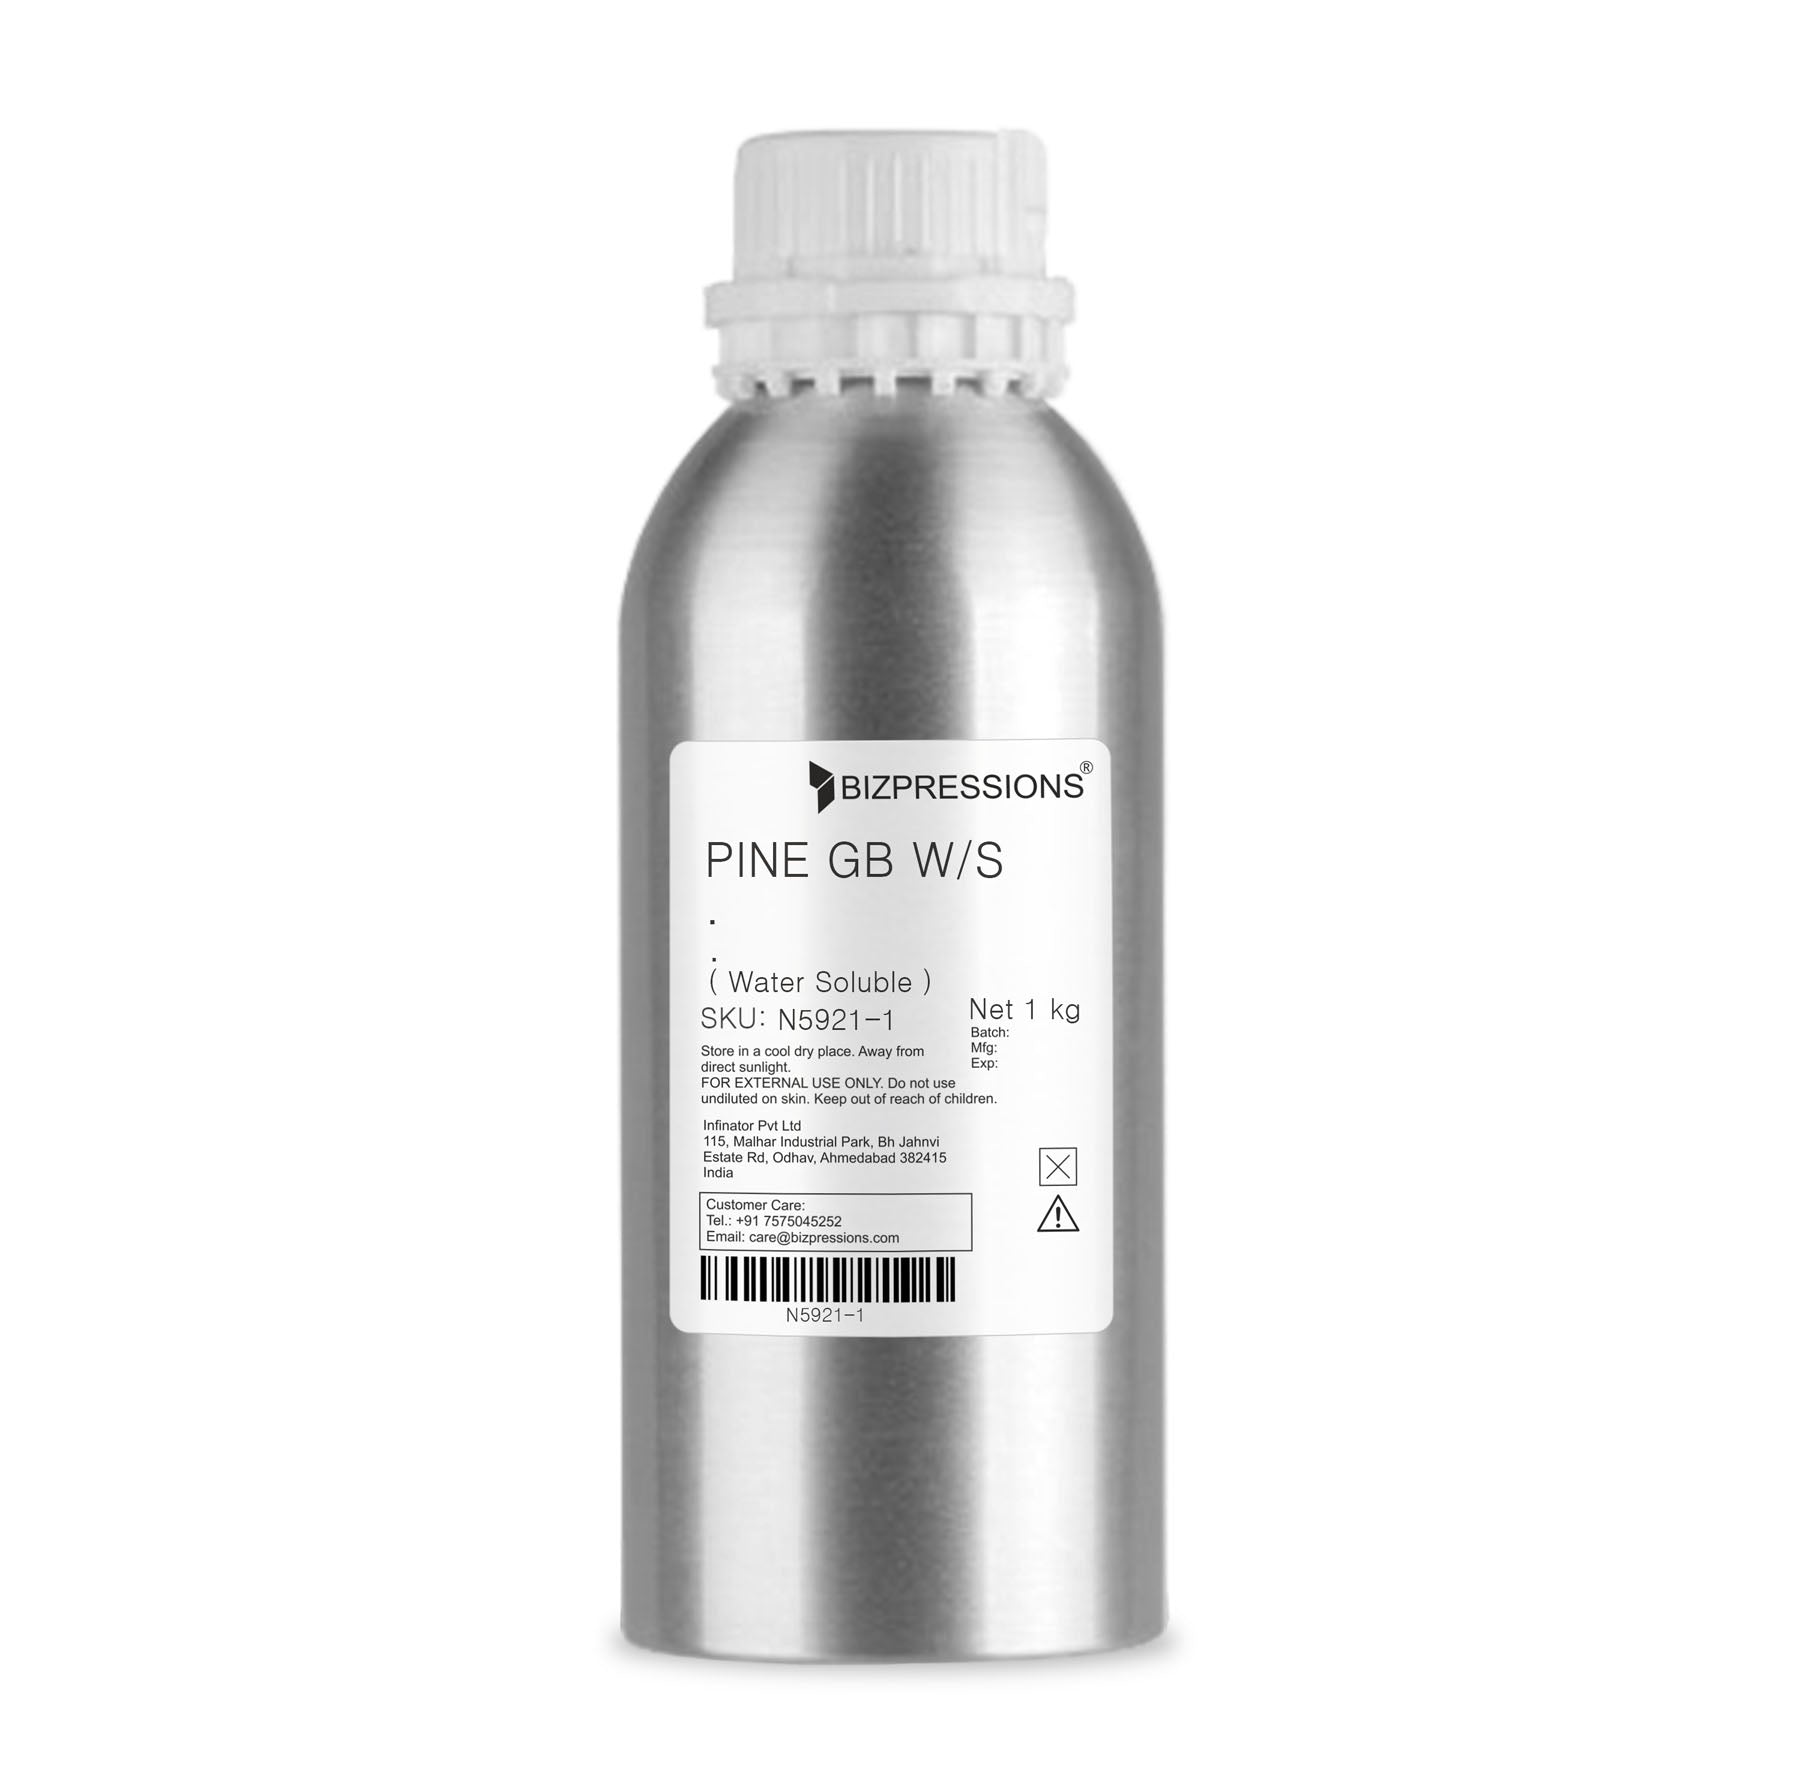 PINE GB W/S - Fragrance ( Water Soluble ) - 1 kg